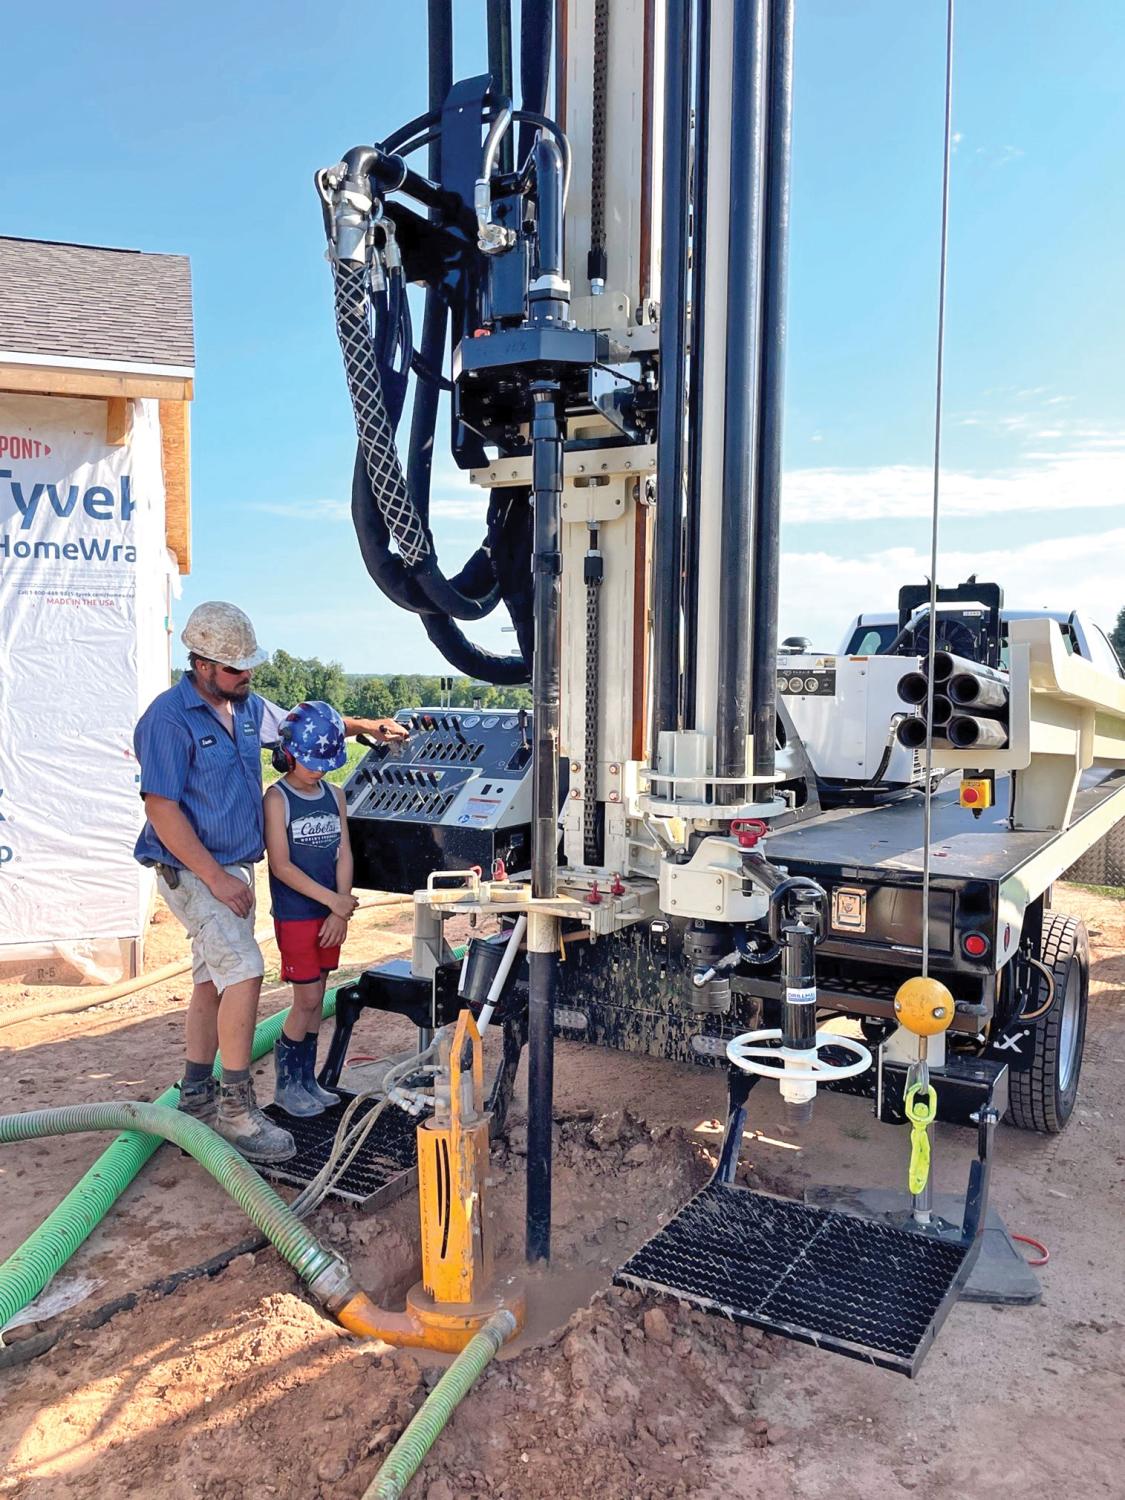 DM250 provides desired efficiency in tight sites, taking hours versus days to complete wells, with ease of operation desired by next generation drillers.